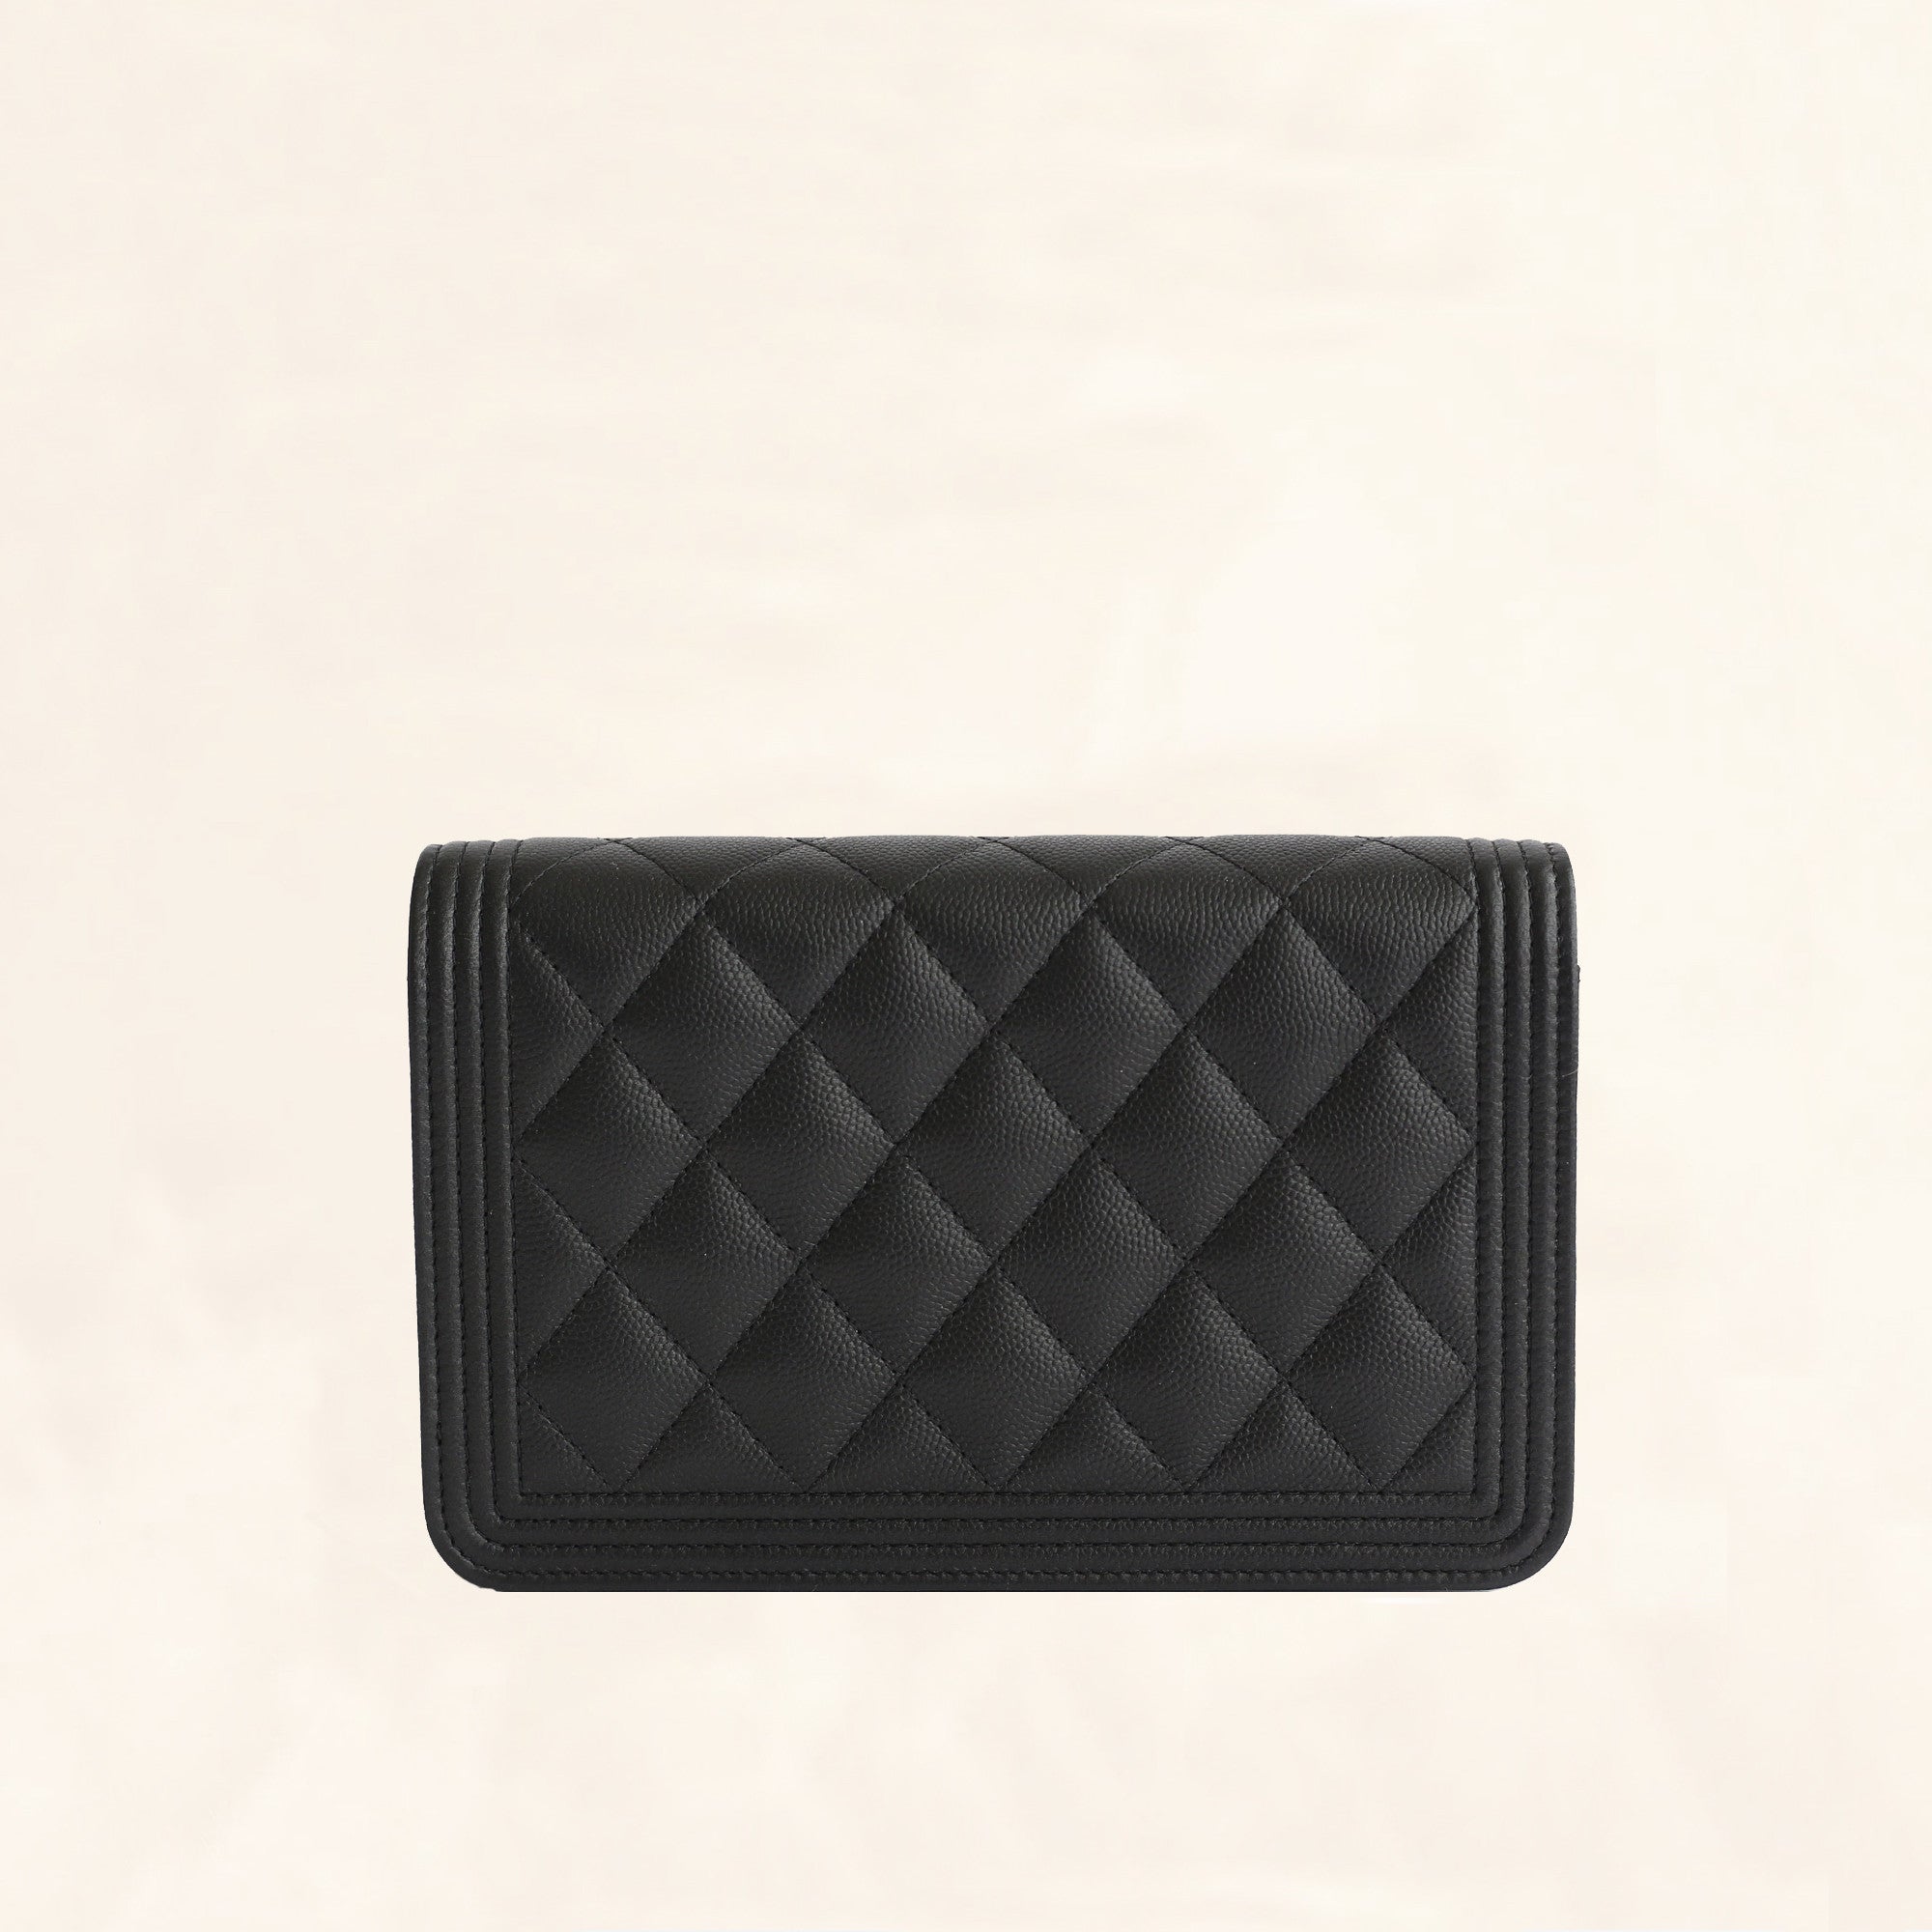 Boy CHANEL Wallet H4.1in × W7.6in Without BOX 21004574